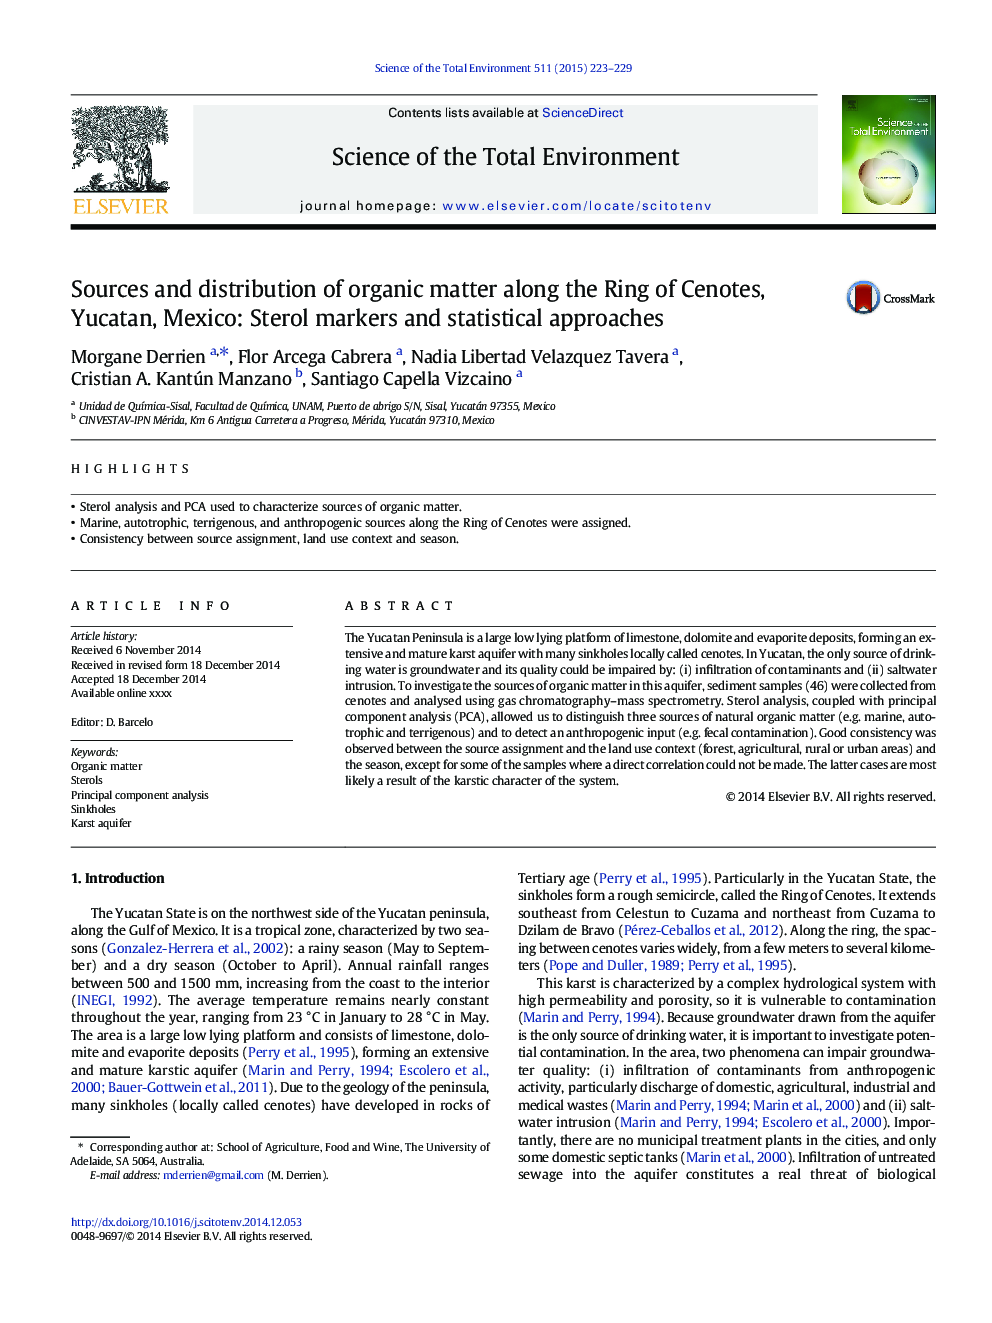 Sources and distribution of organic matter along the Ring of Cenotes, Yucatan, Mexico: Sterol markers and statistical approaches